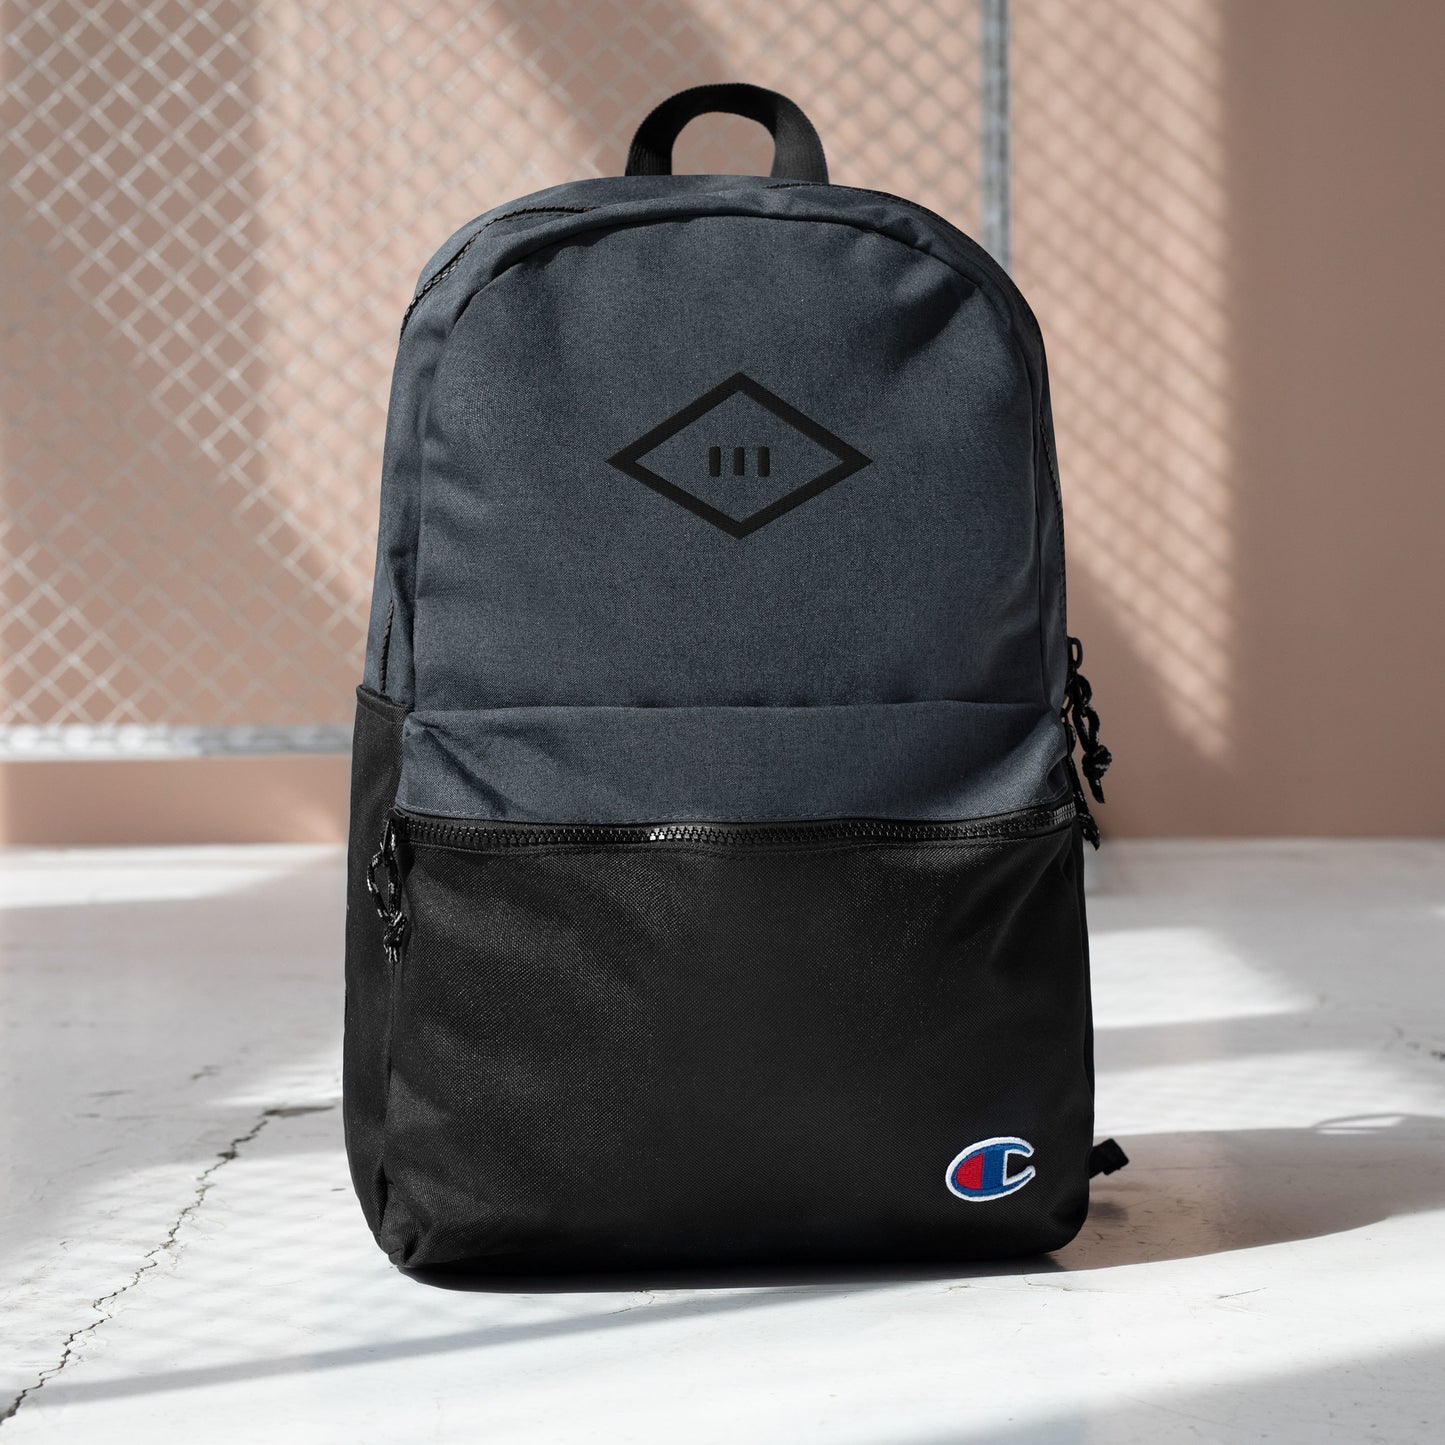 RUGBYNATION x CHAMPION Backpack